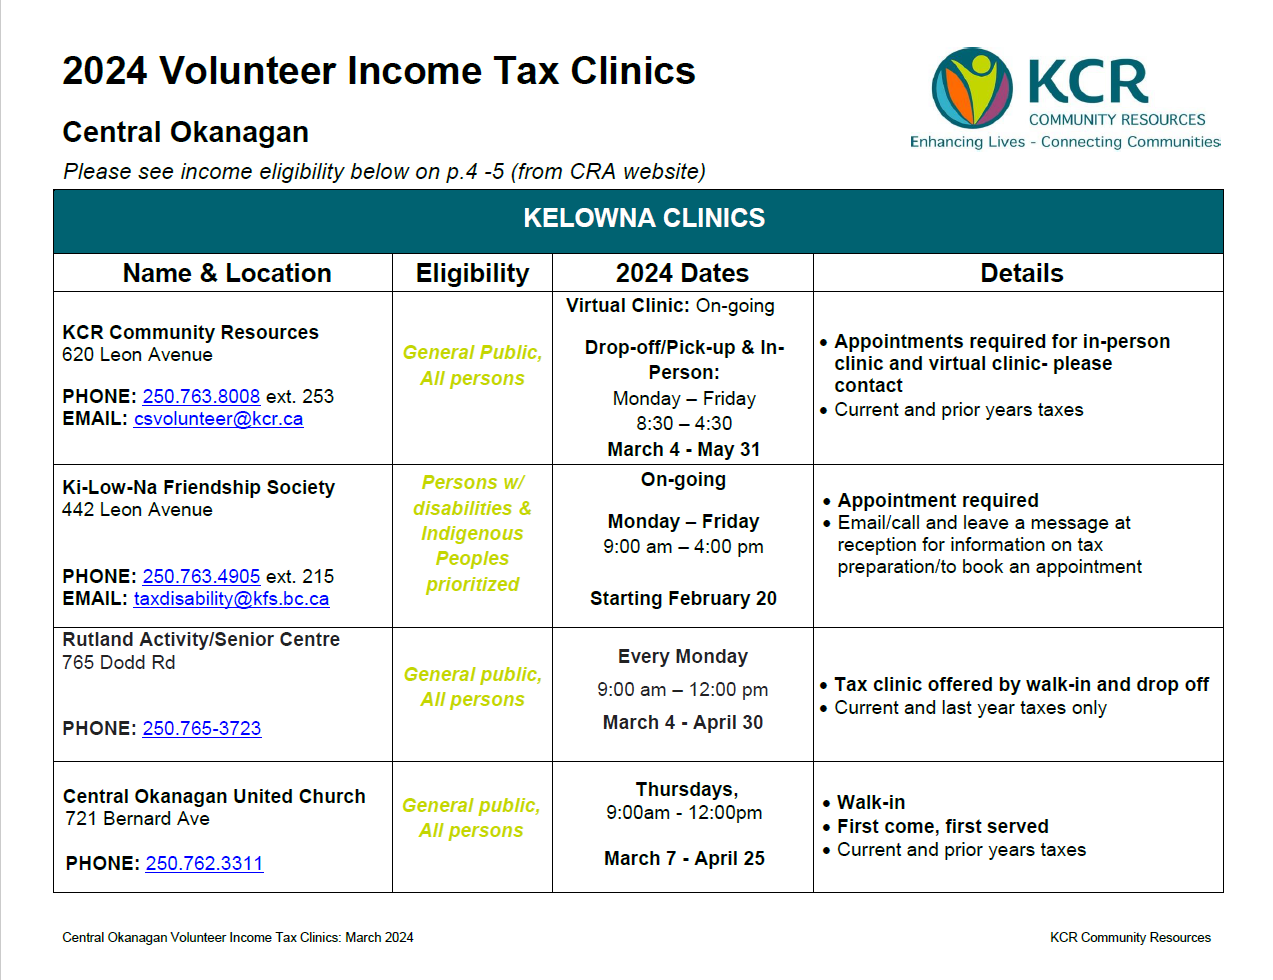 Volunteer Income Tax Clinics - March 2024